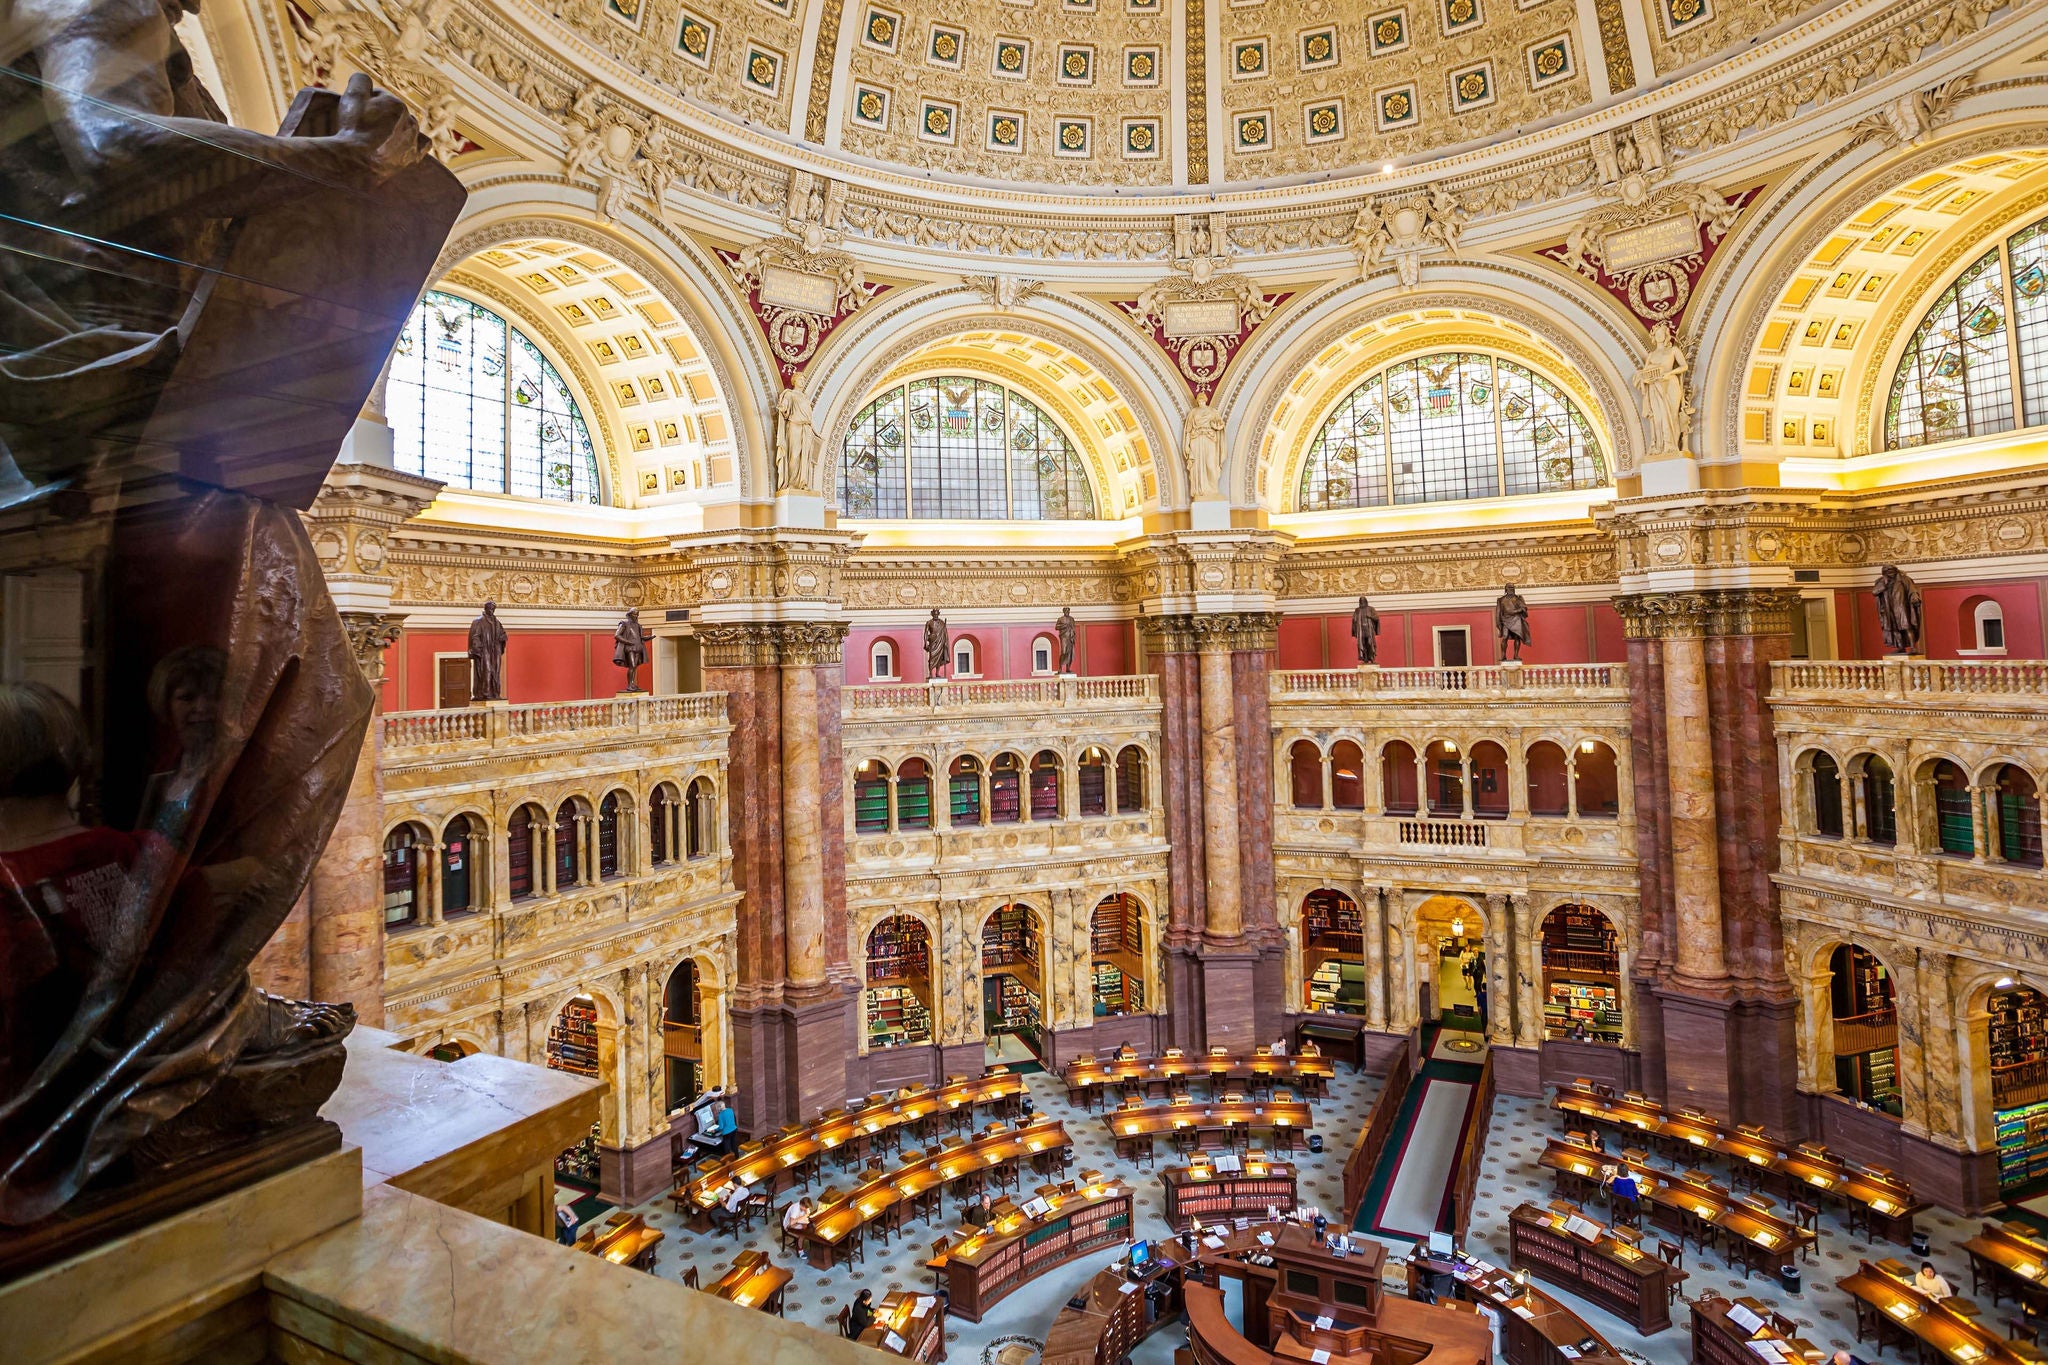 Main Hall of the Library of Congress ceiling, Washington, DC